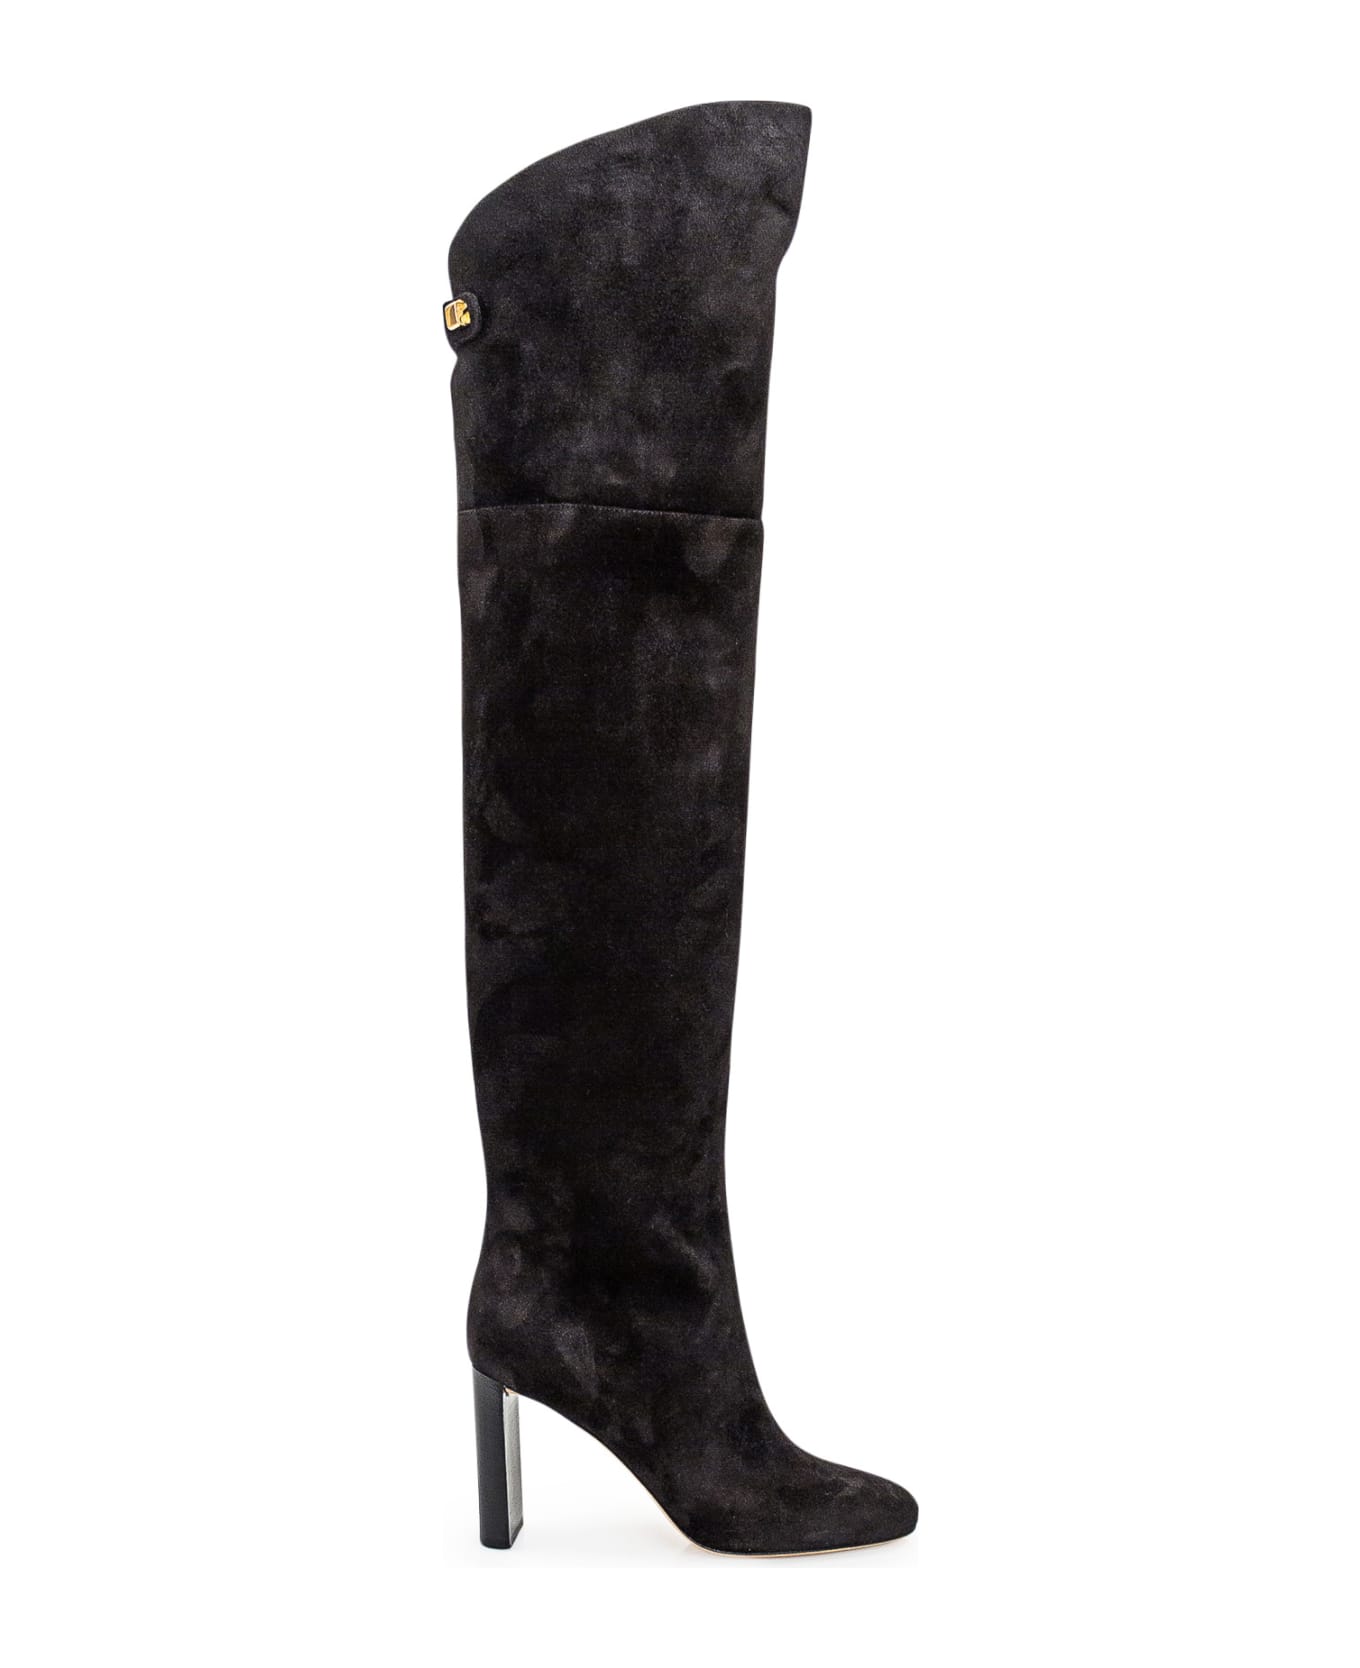 Maison Skorpios Marylin Suede Leather Boots - BLACK ブーツ